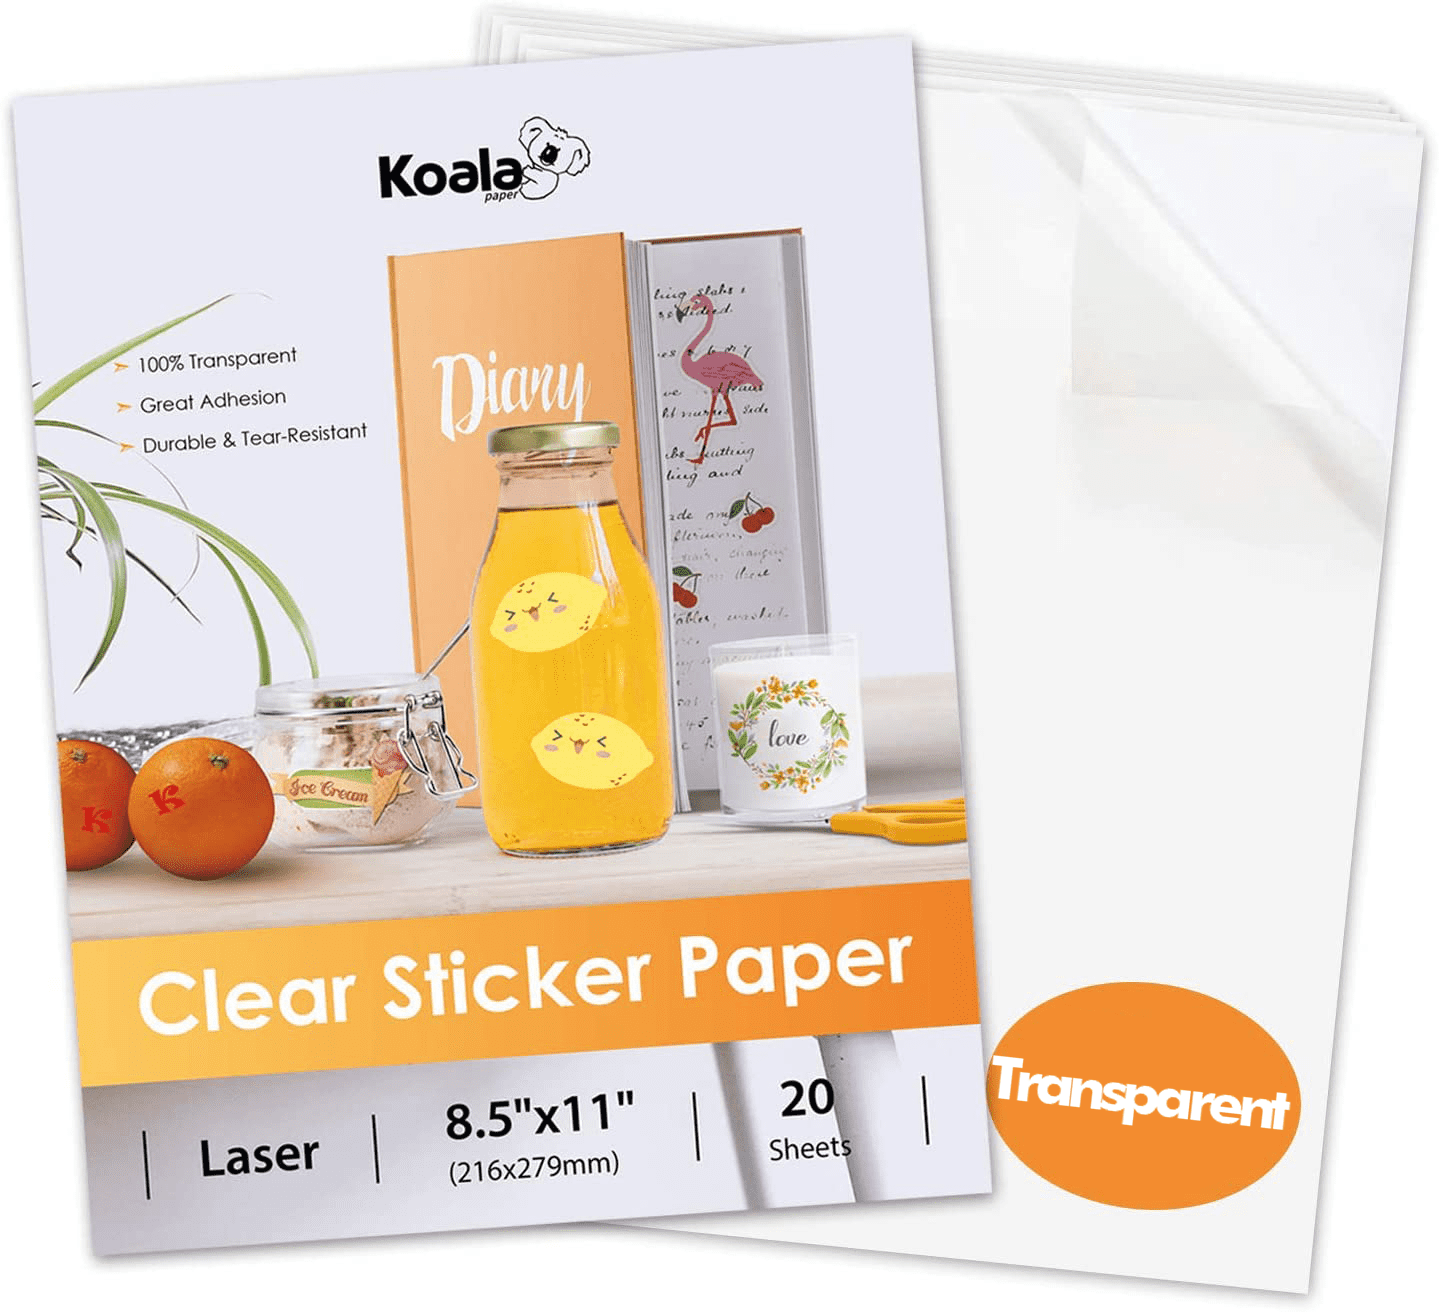 (20 Sheets) 90% Clear Sticker Paper for Inkjet Printer - Glossy 8.5 x 11 -  Printable Vinyl Sticker Paper for Circut - Personalized Stickers - Labels 